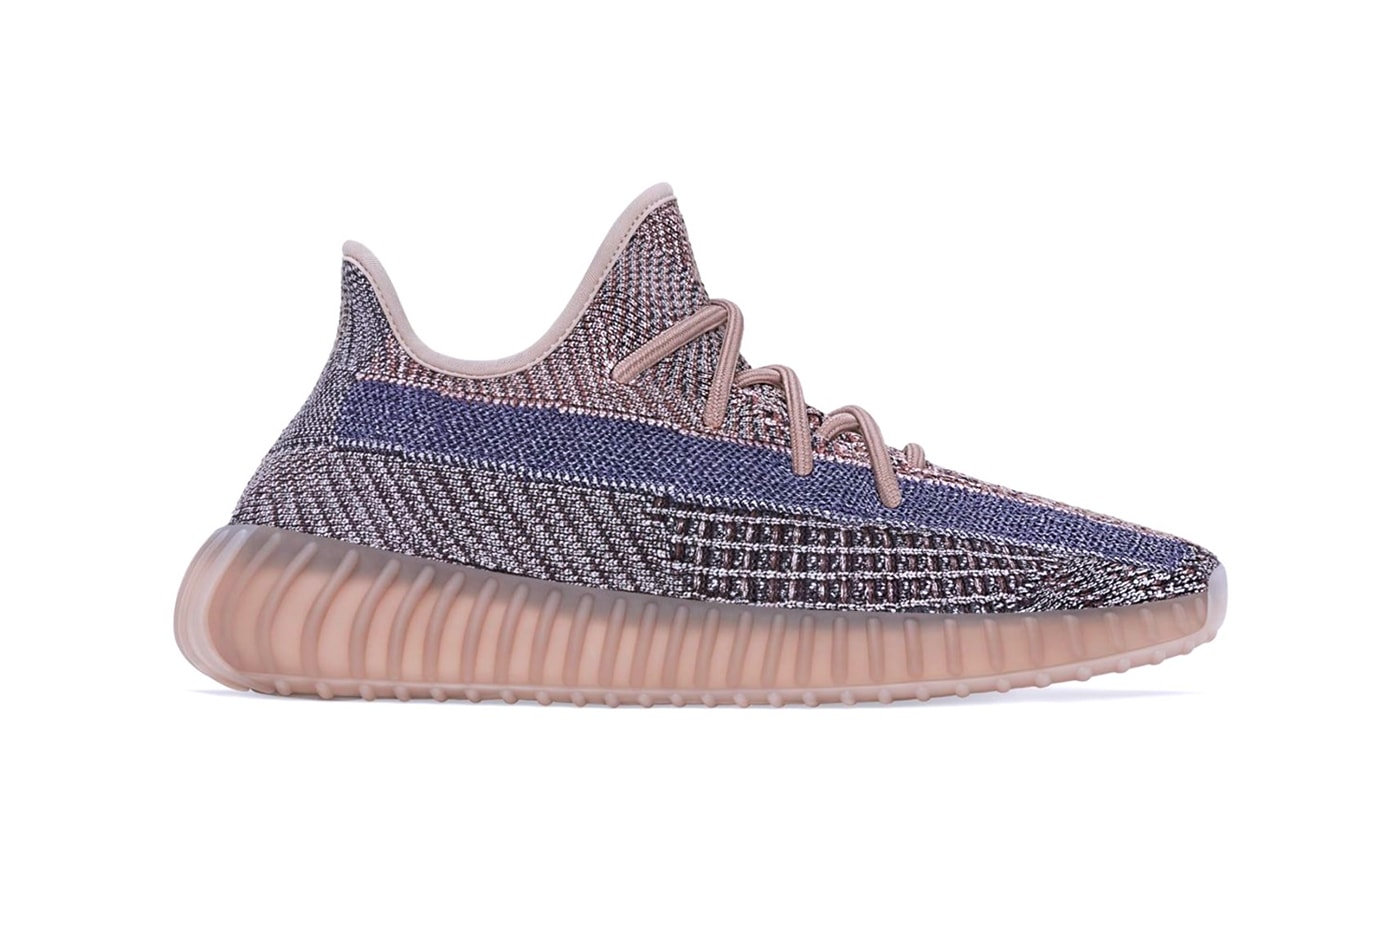 adidas YEEZY BOOST 350 V2 Fade Release Date Info Buy Price Full Look h02795